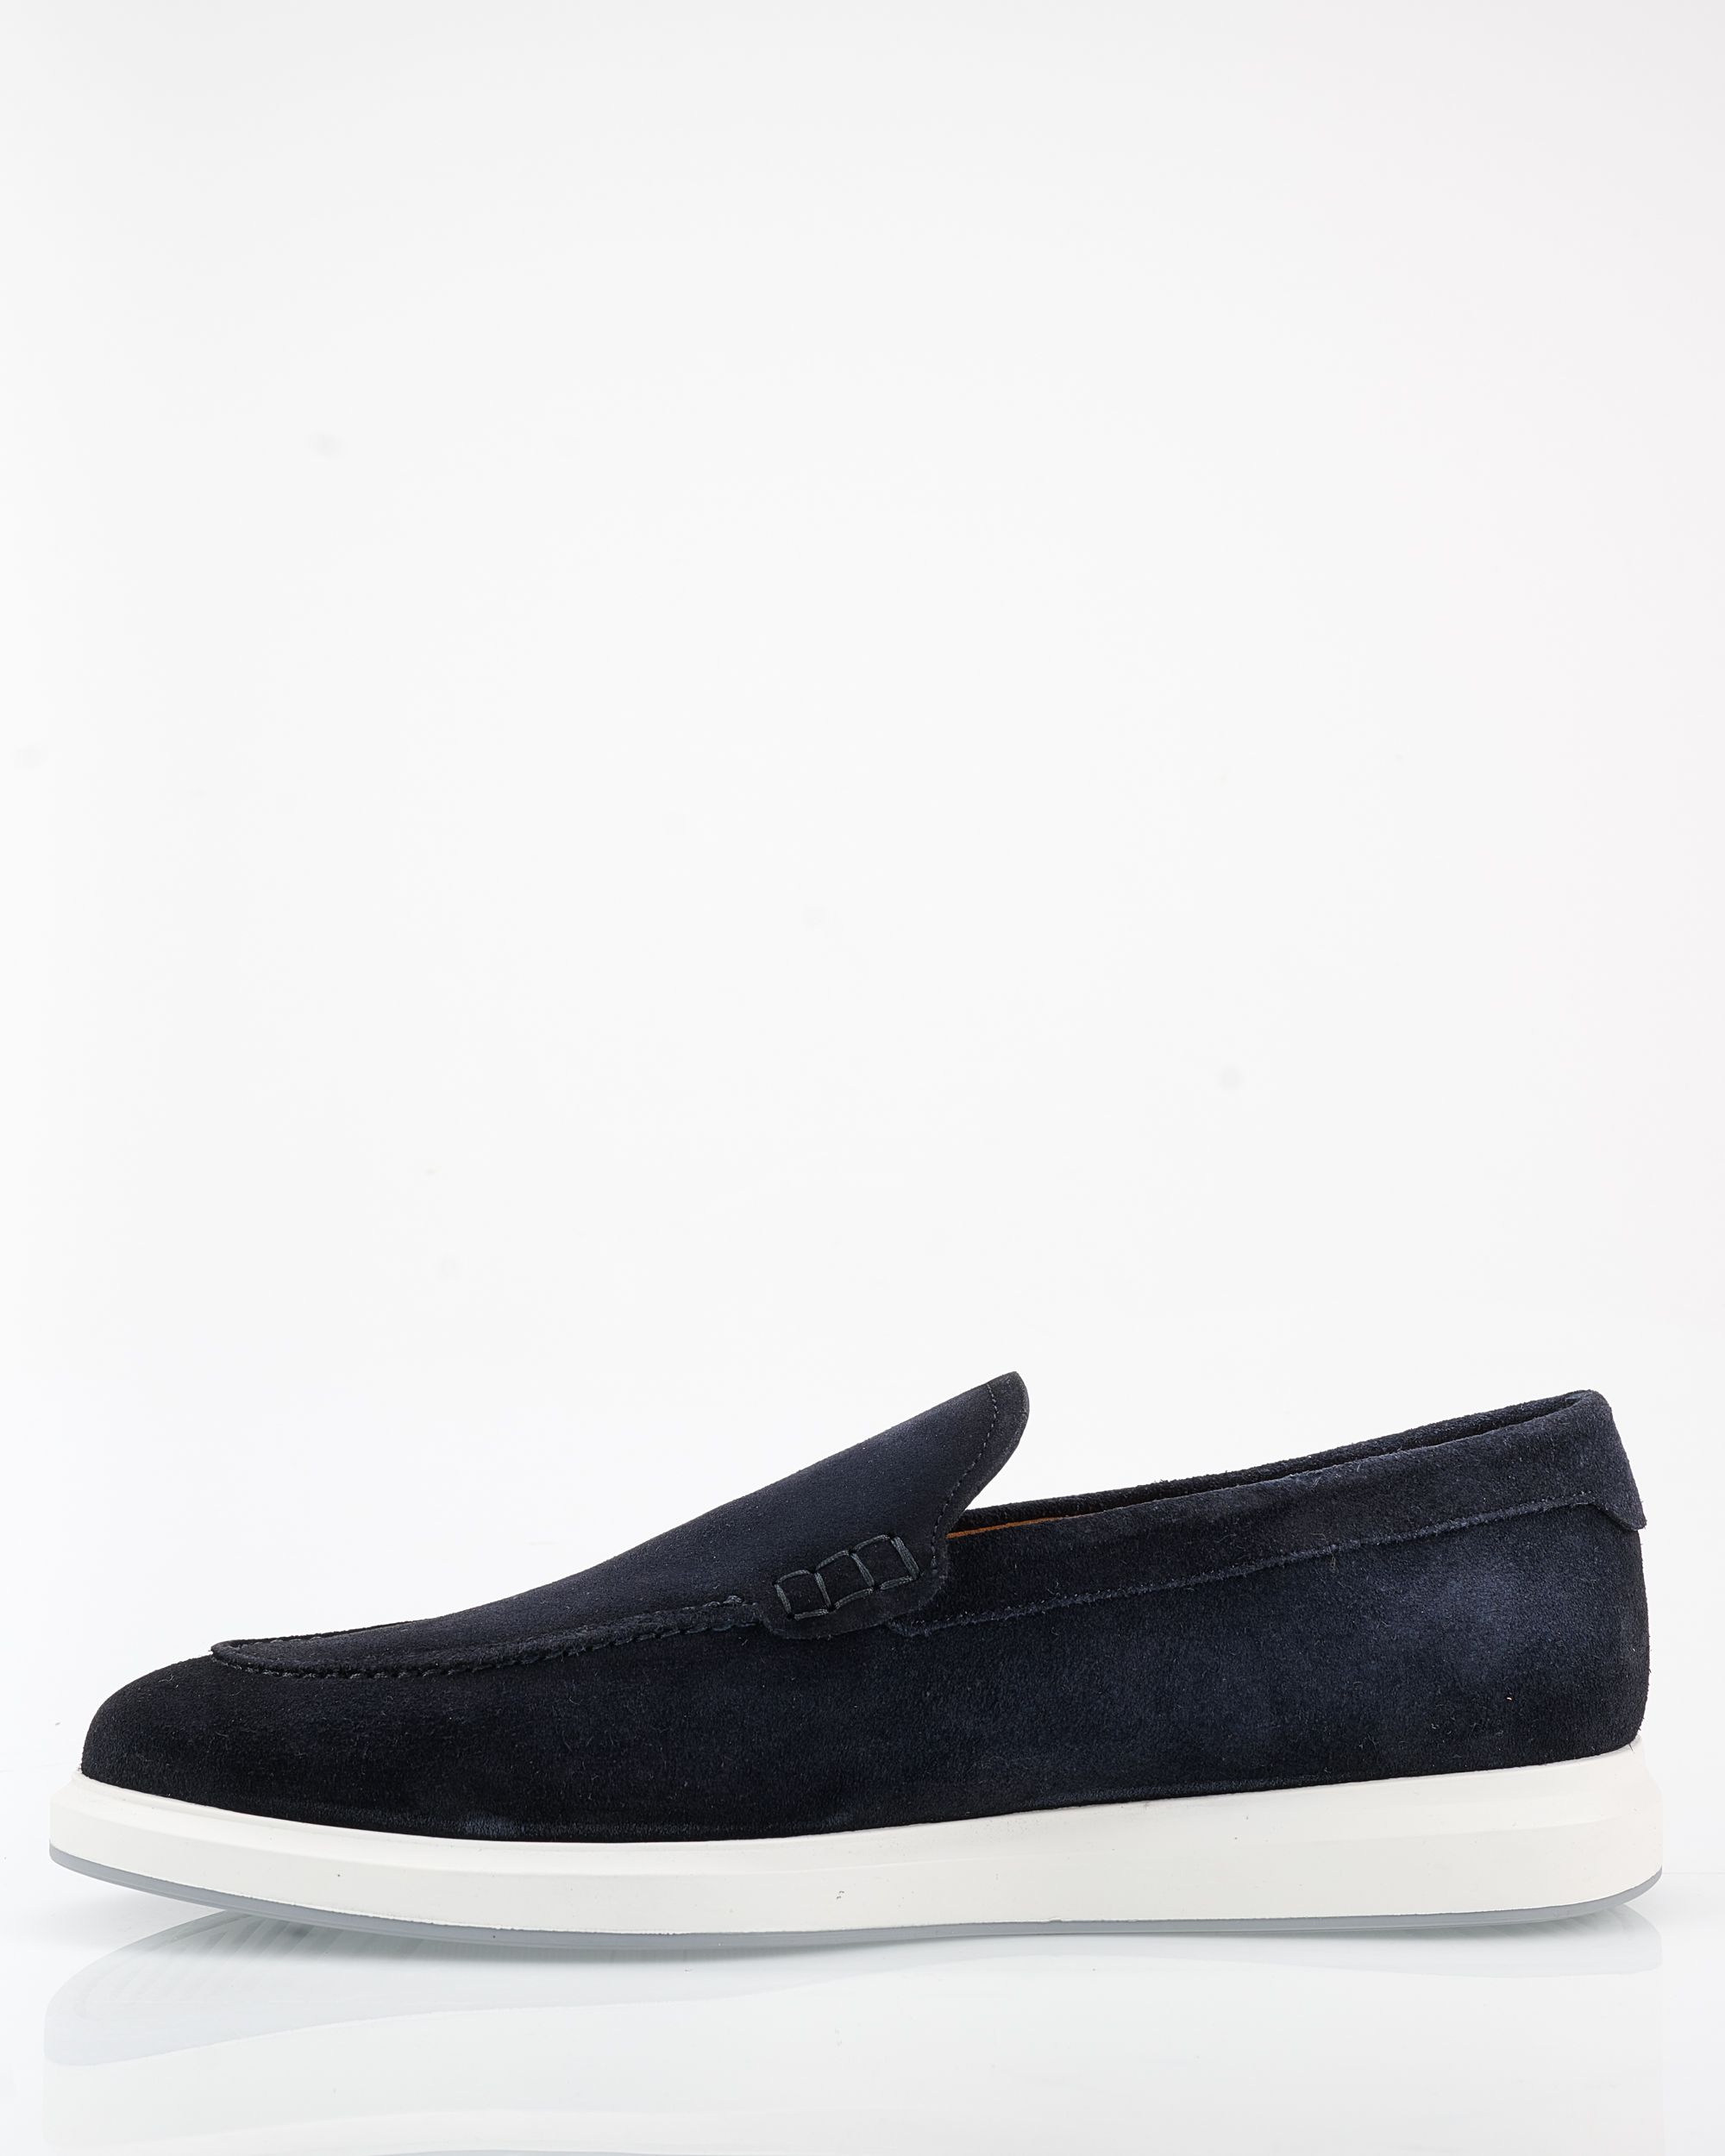 Magnanni Loafers Blauw 091972-001-41